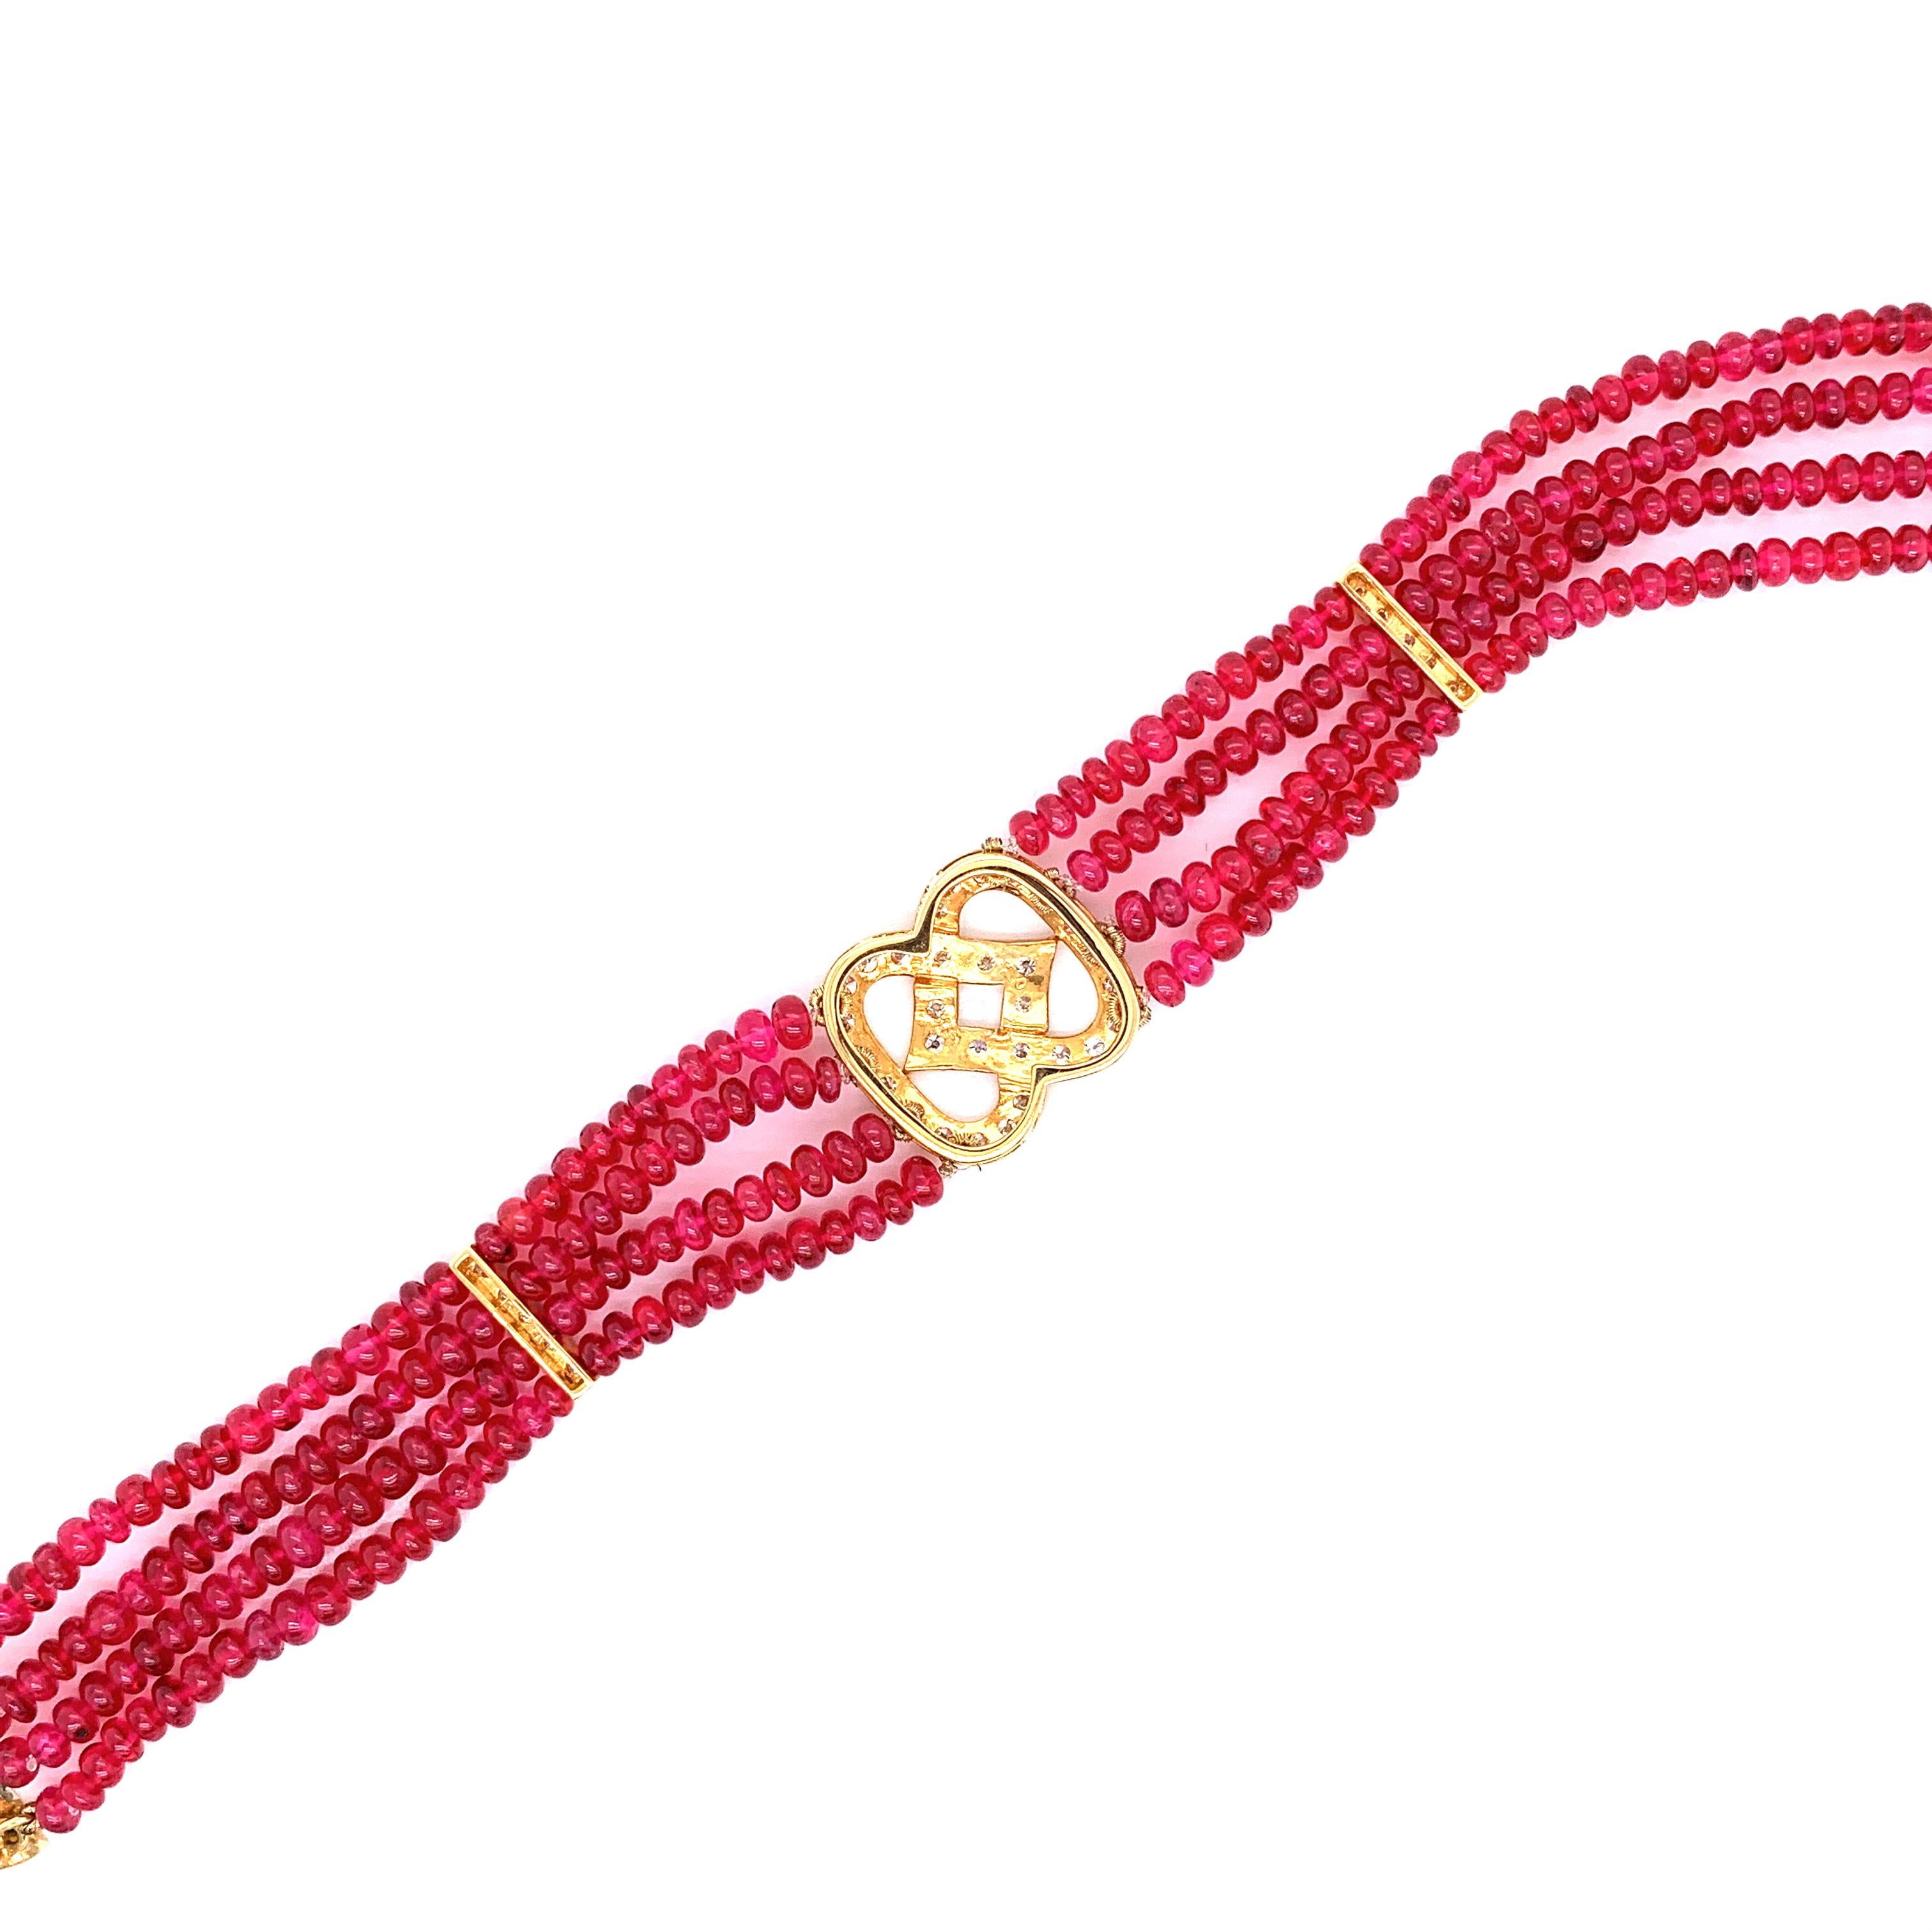 Contemporary 48 Carat Burmese Red Spinel Beads and White Diamond Gold Bracelet For Sale